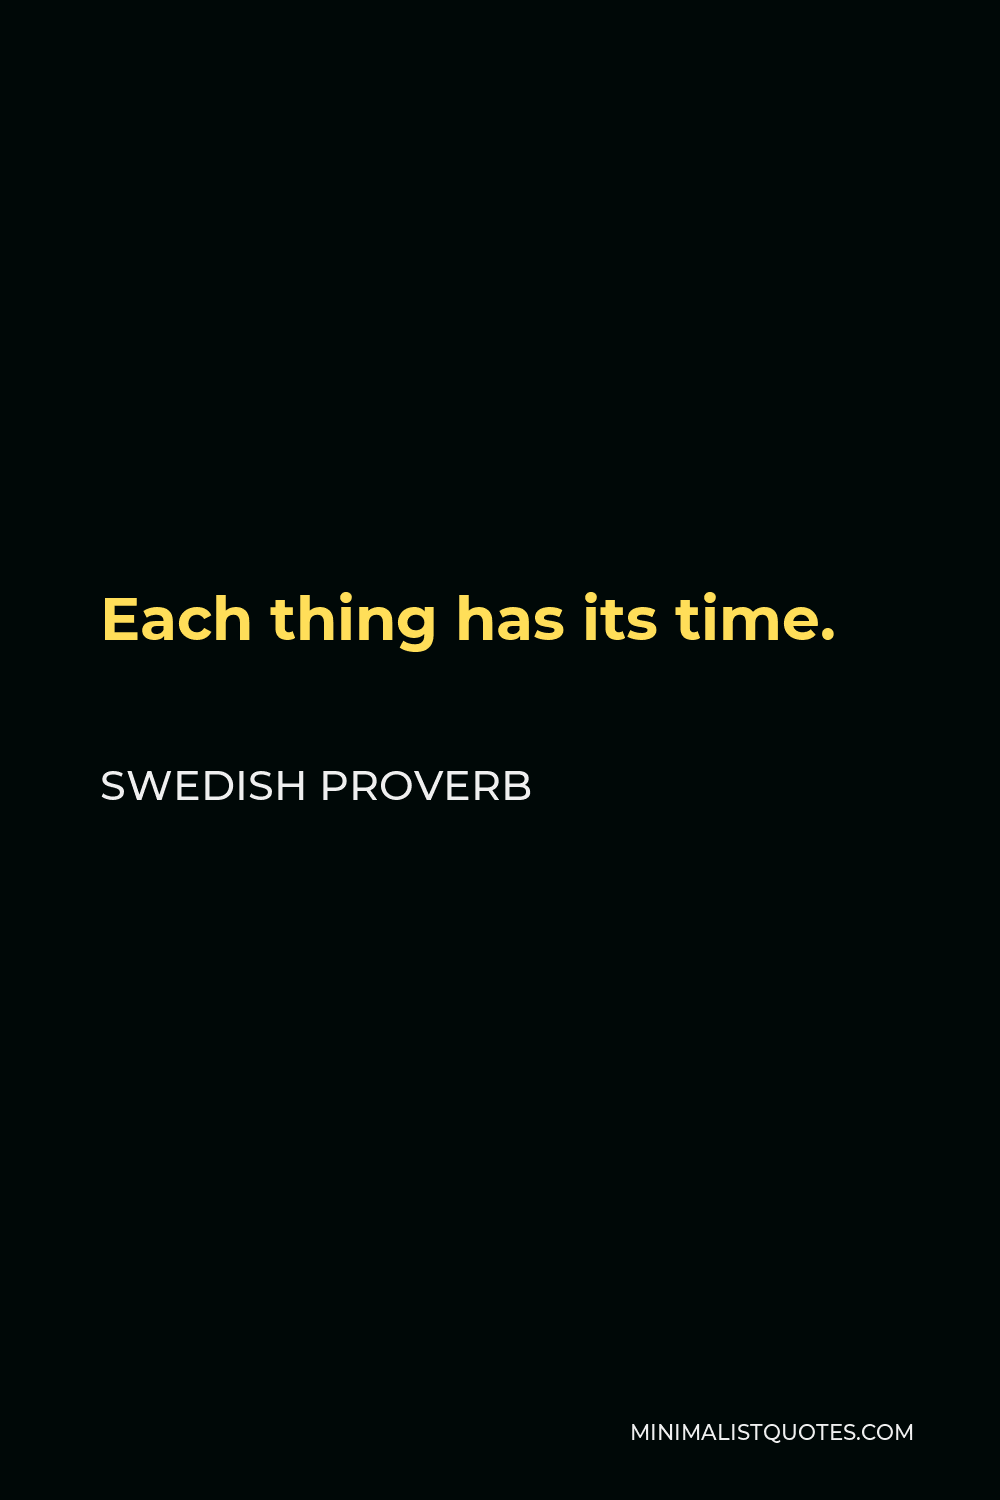 Swedish Proverb Quote - Each thing has its time.